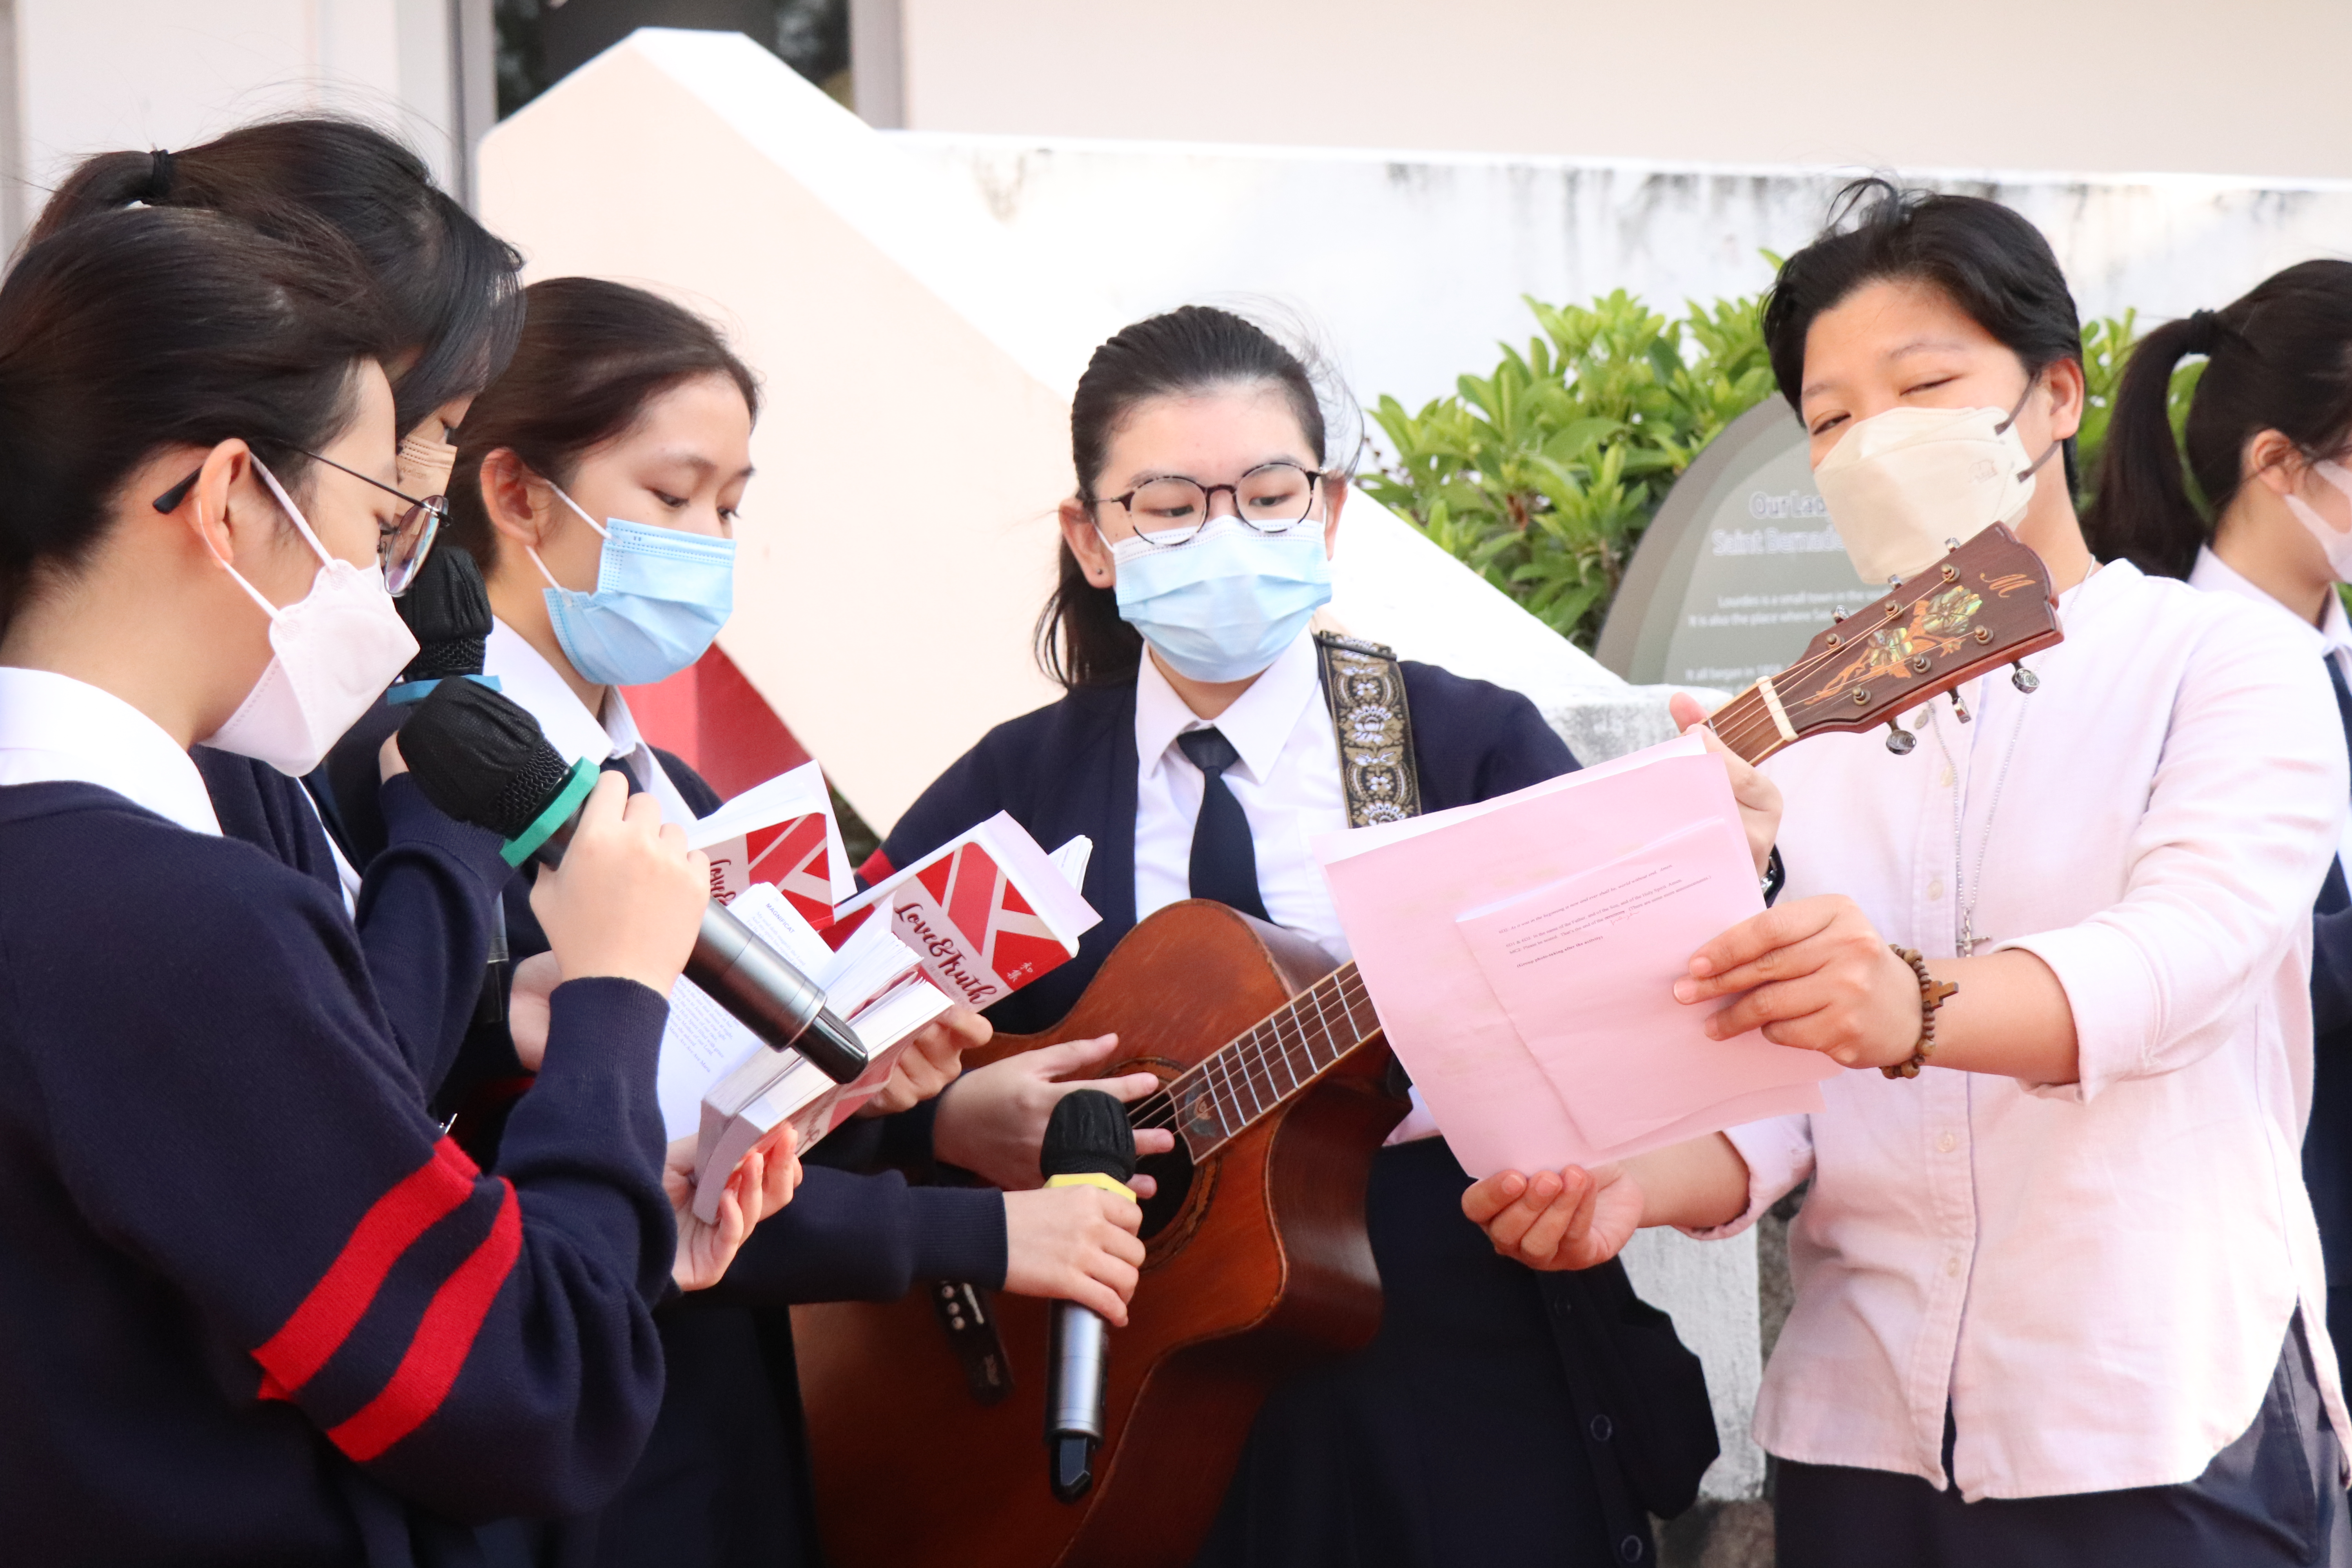 A group of people wearing face masks holding microphones and a guitarDescription automatically generated